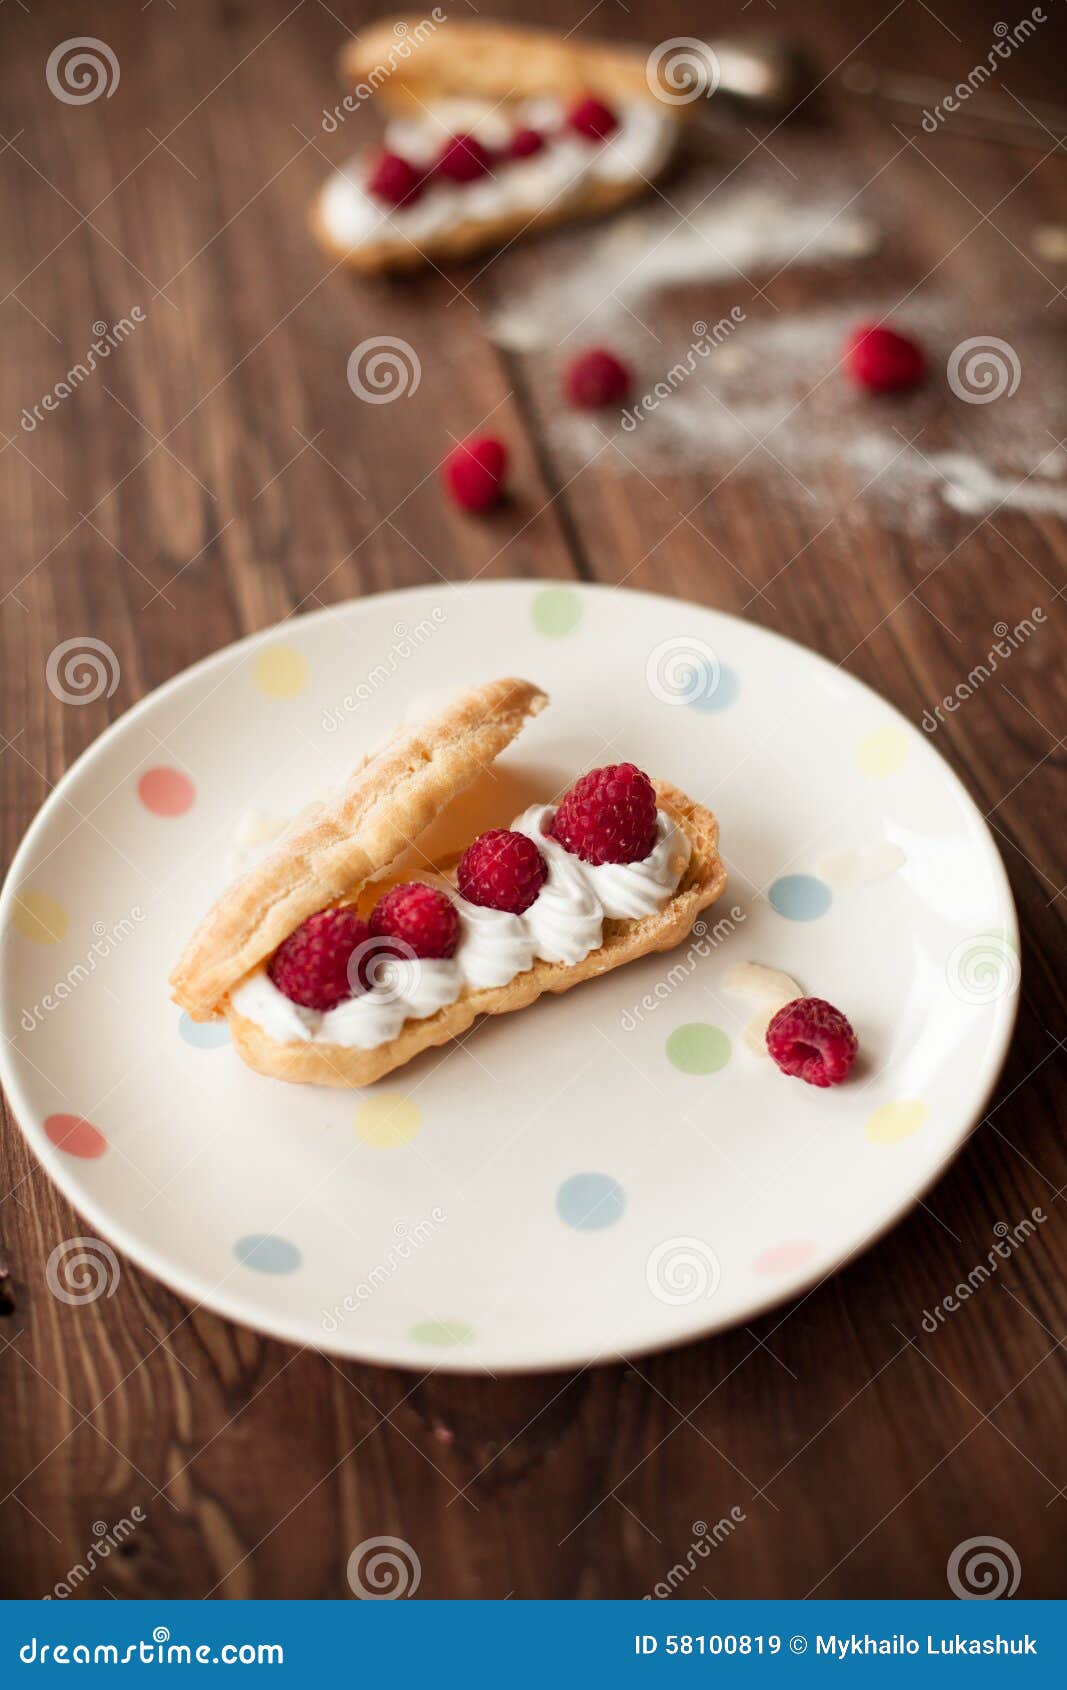 sweet afters with fresh raspberries on wood table